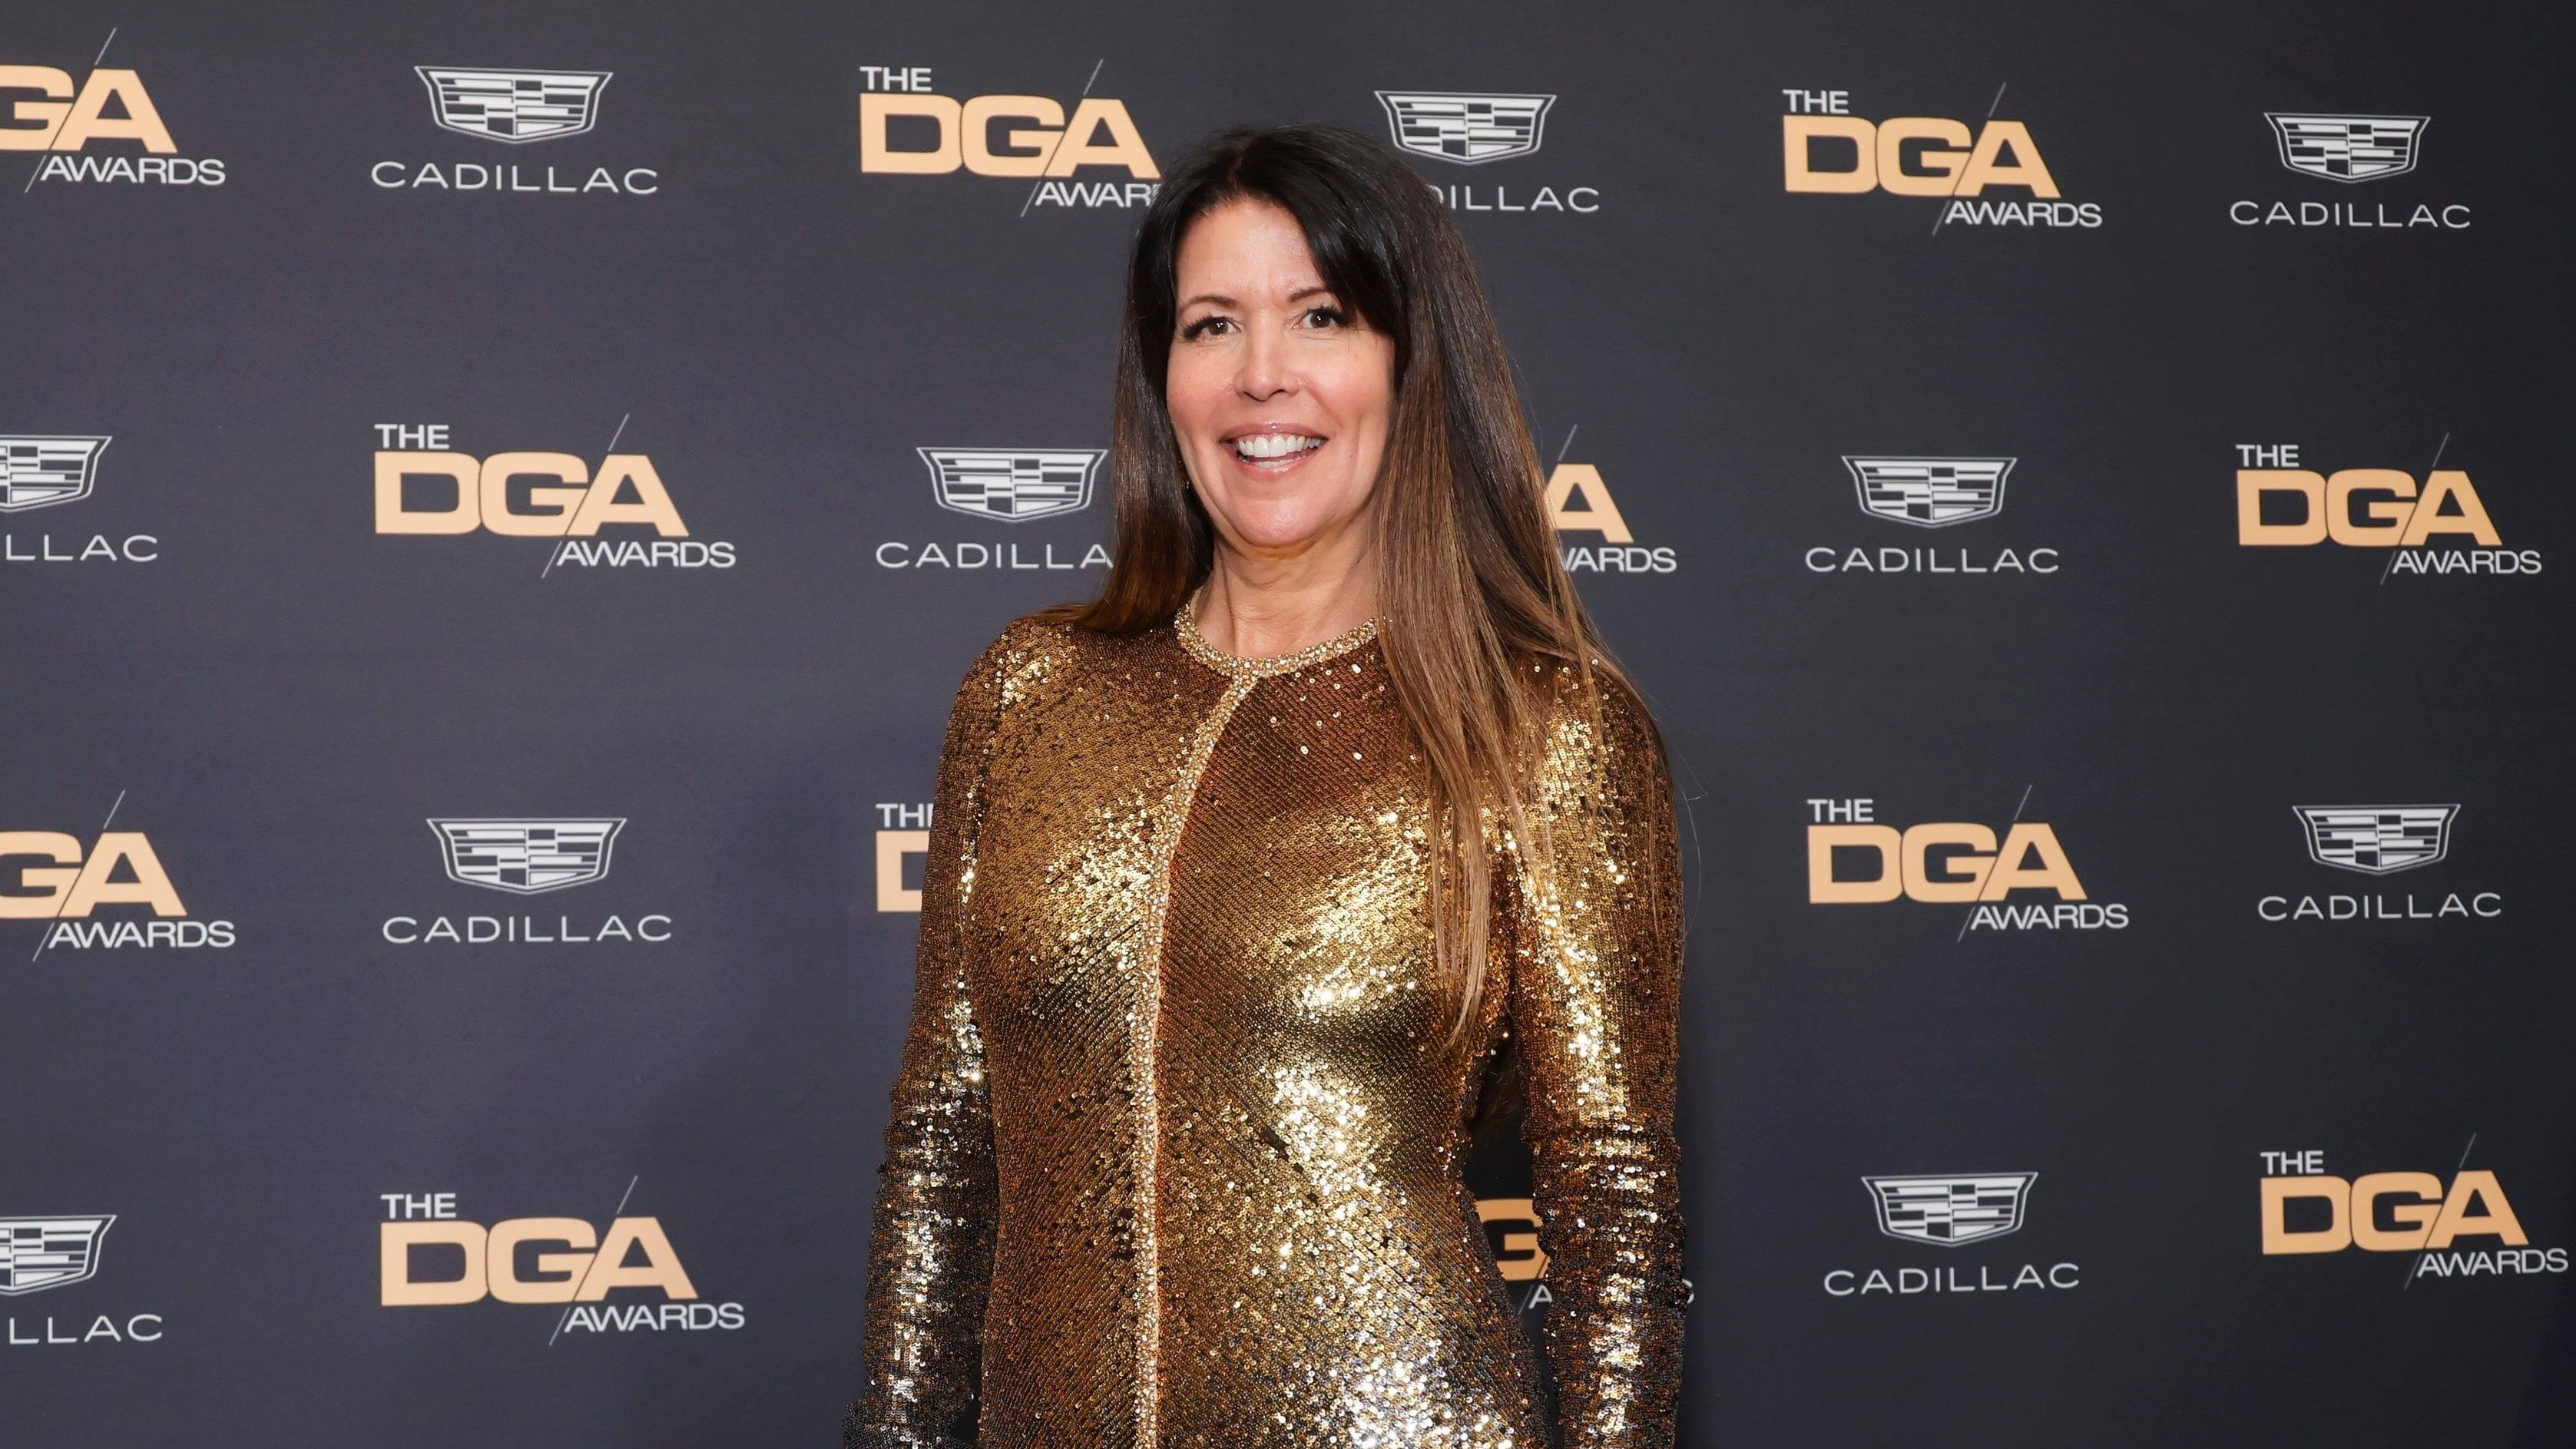 Patty Jenkins’ Star Wars movie is apparently back on